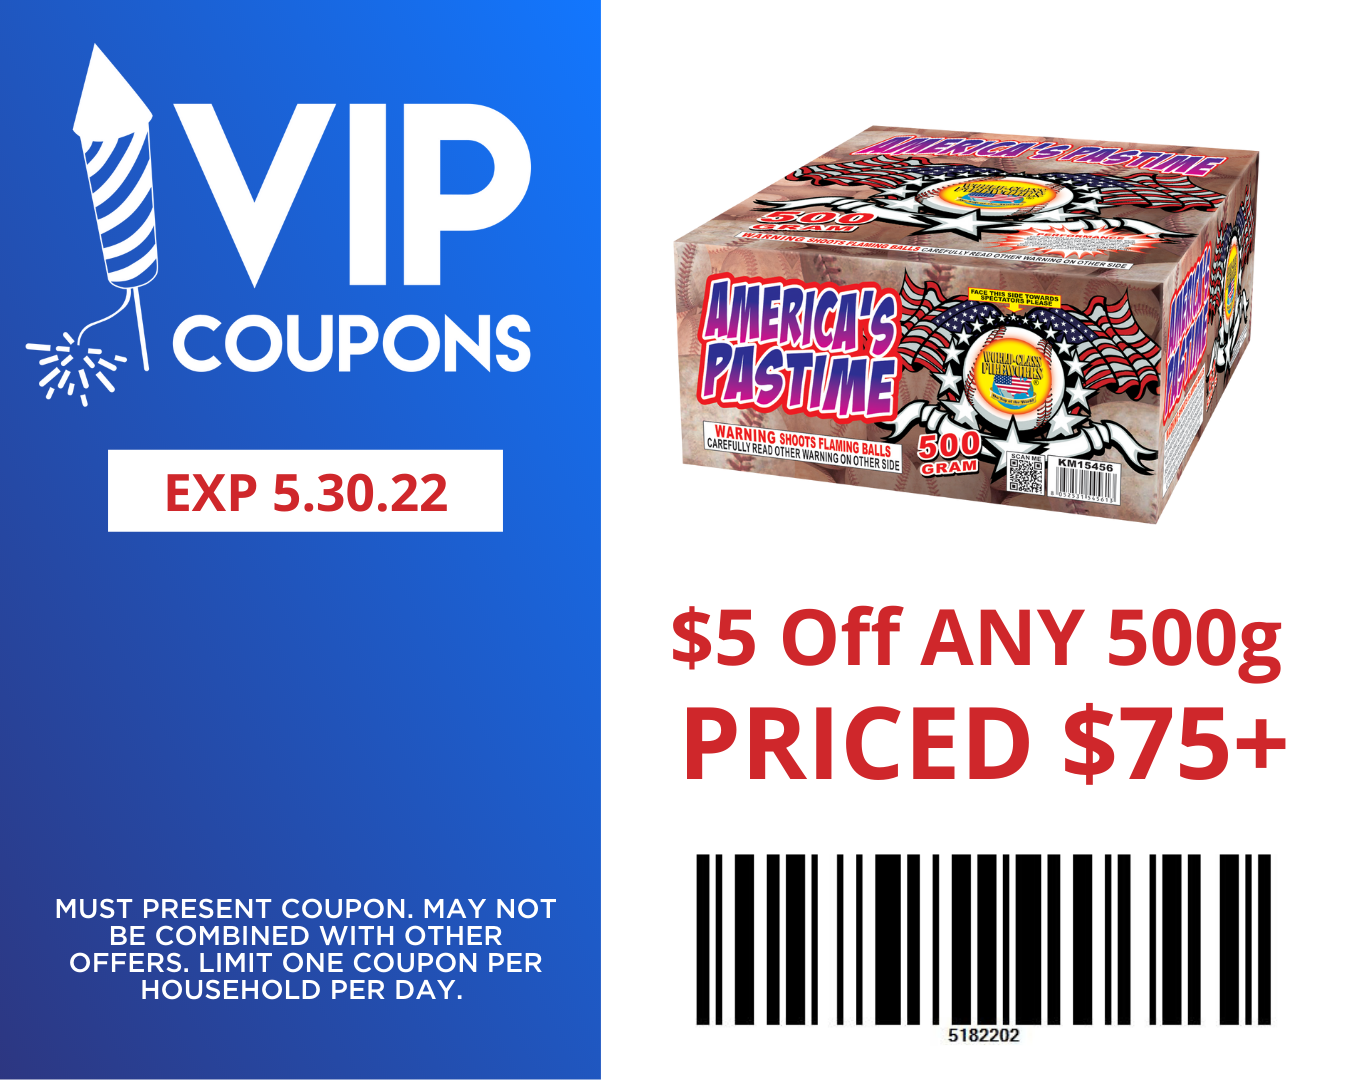 Firework Coupons 4 Great Offers!